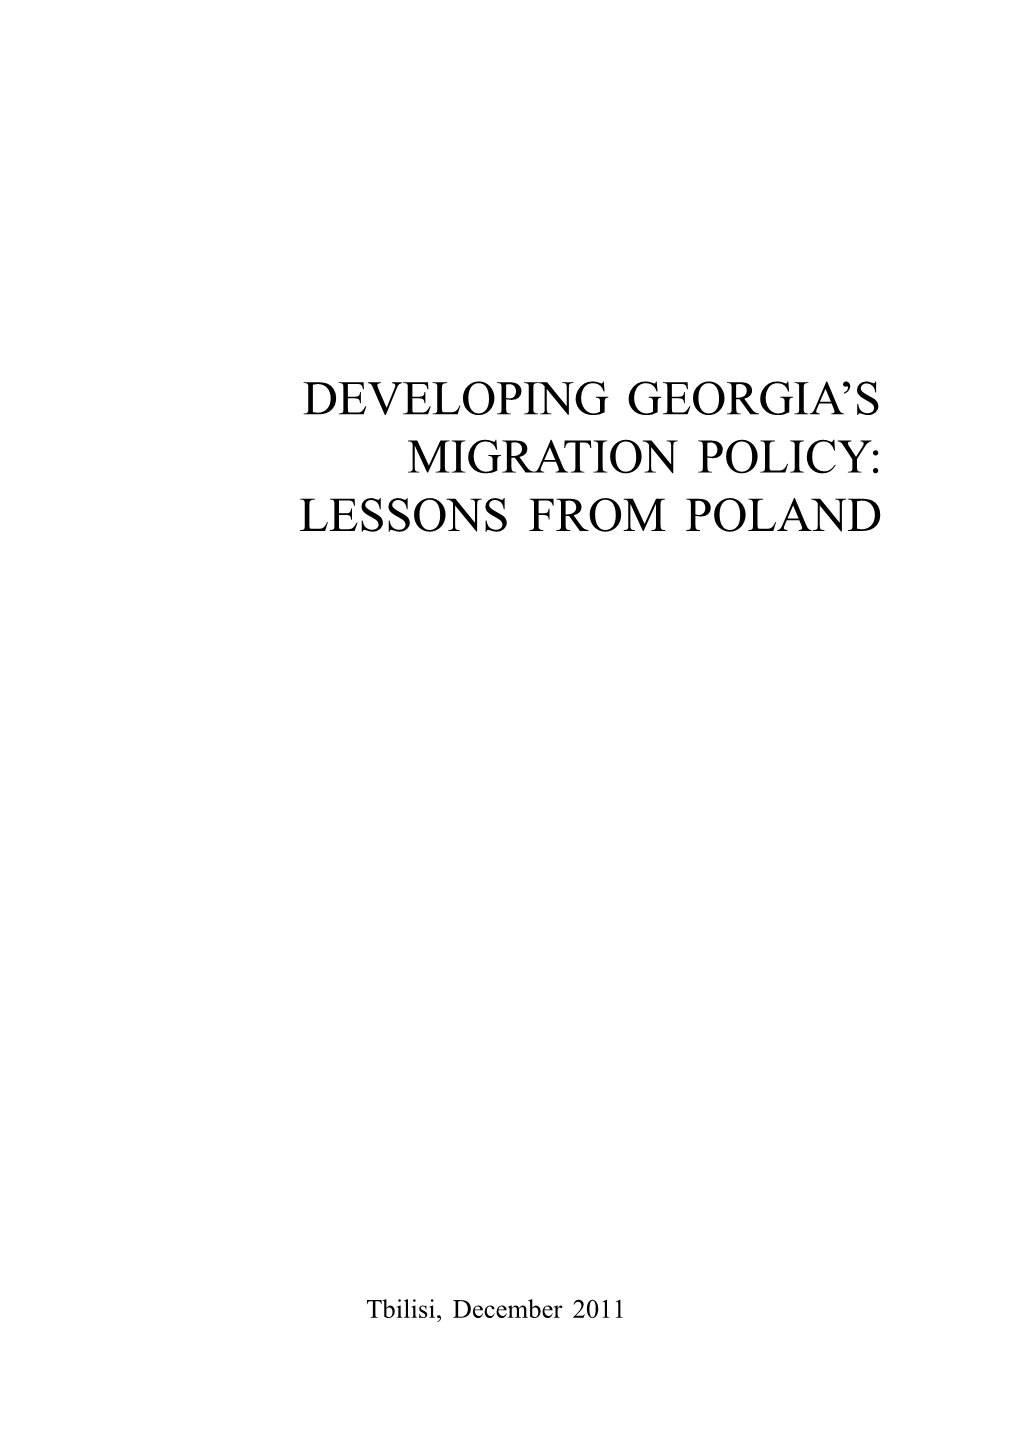 Developing Georgia's Migration Policy